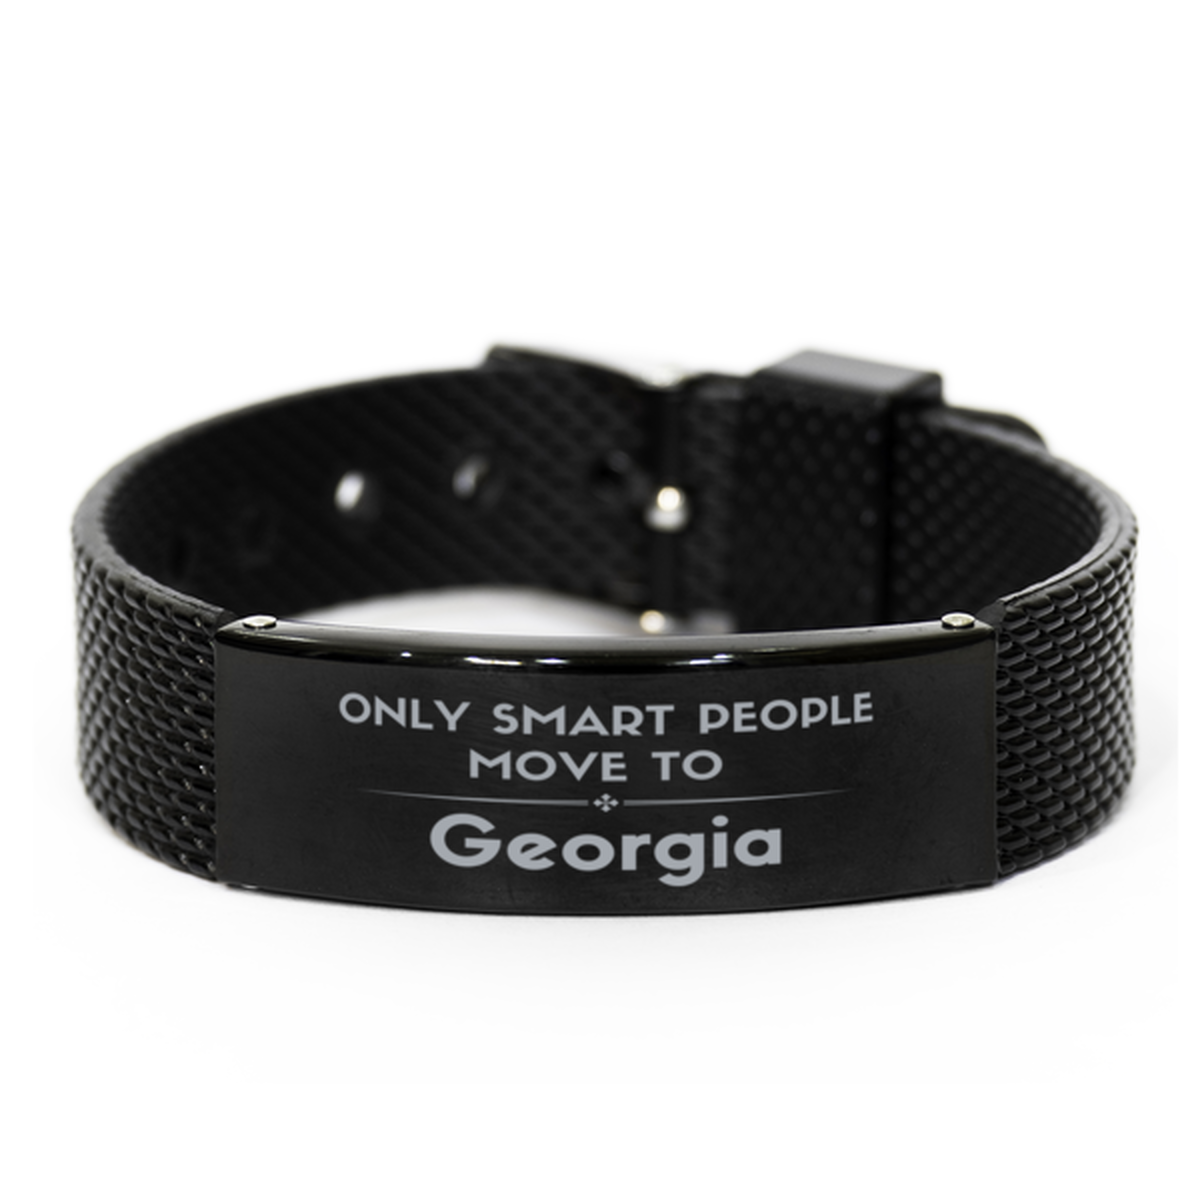 Only smart people move to Georgia Black Shark Mesh Bracelet, Gag Gifts For Georgia, Move to Georgia Gifts for Friends Coworker Funny Saying Quote